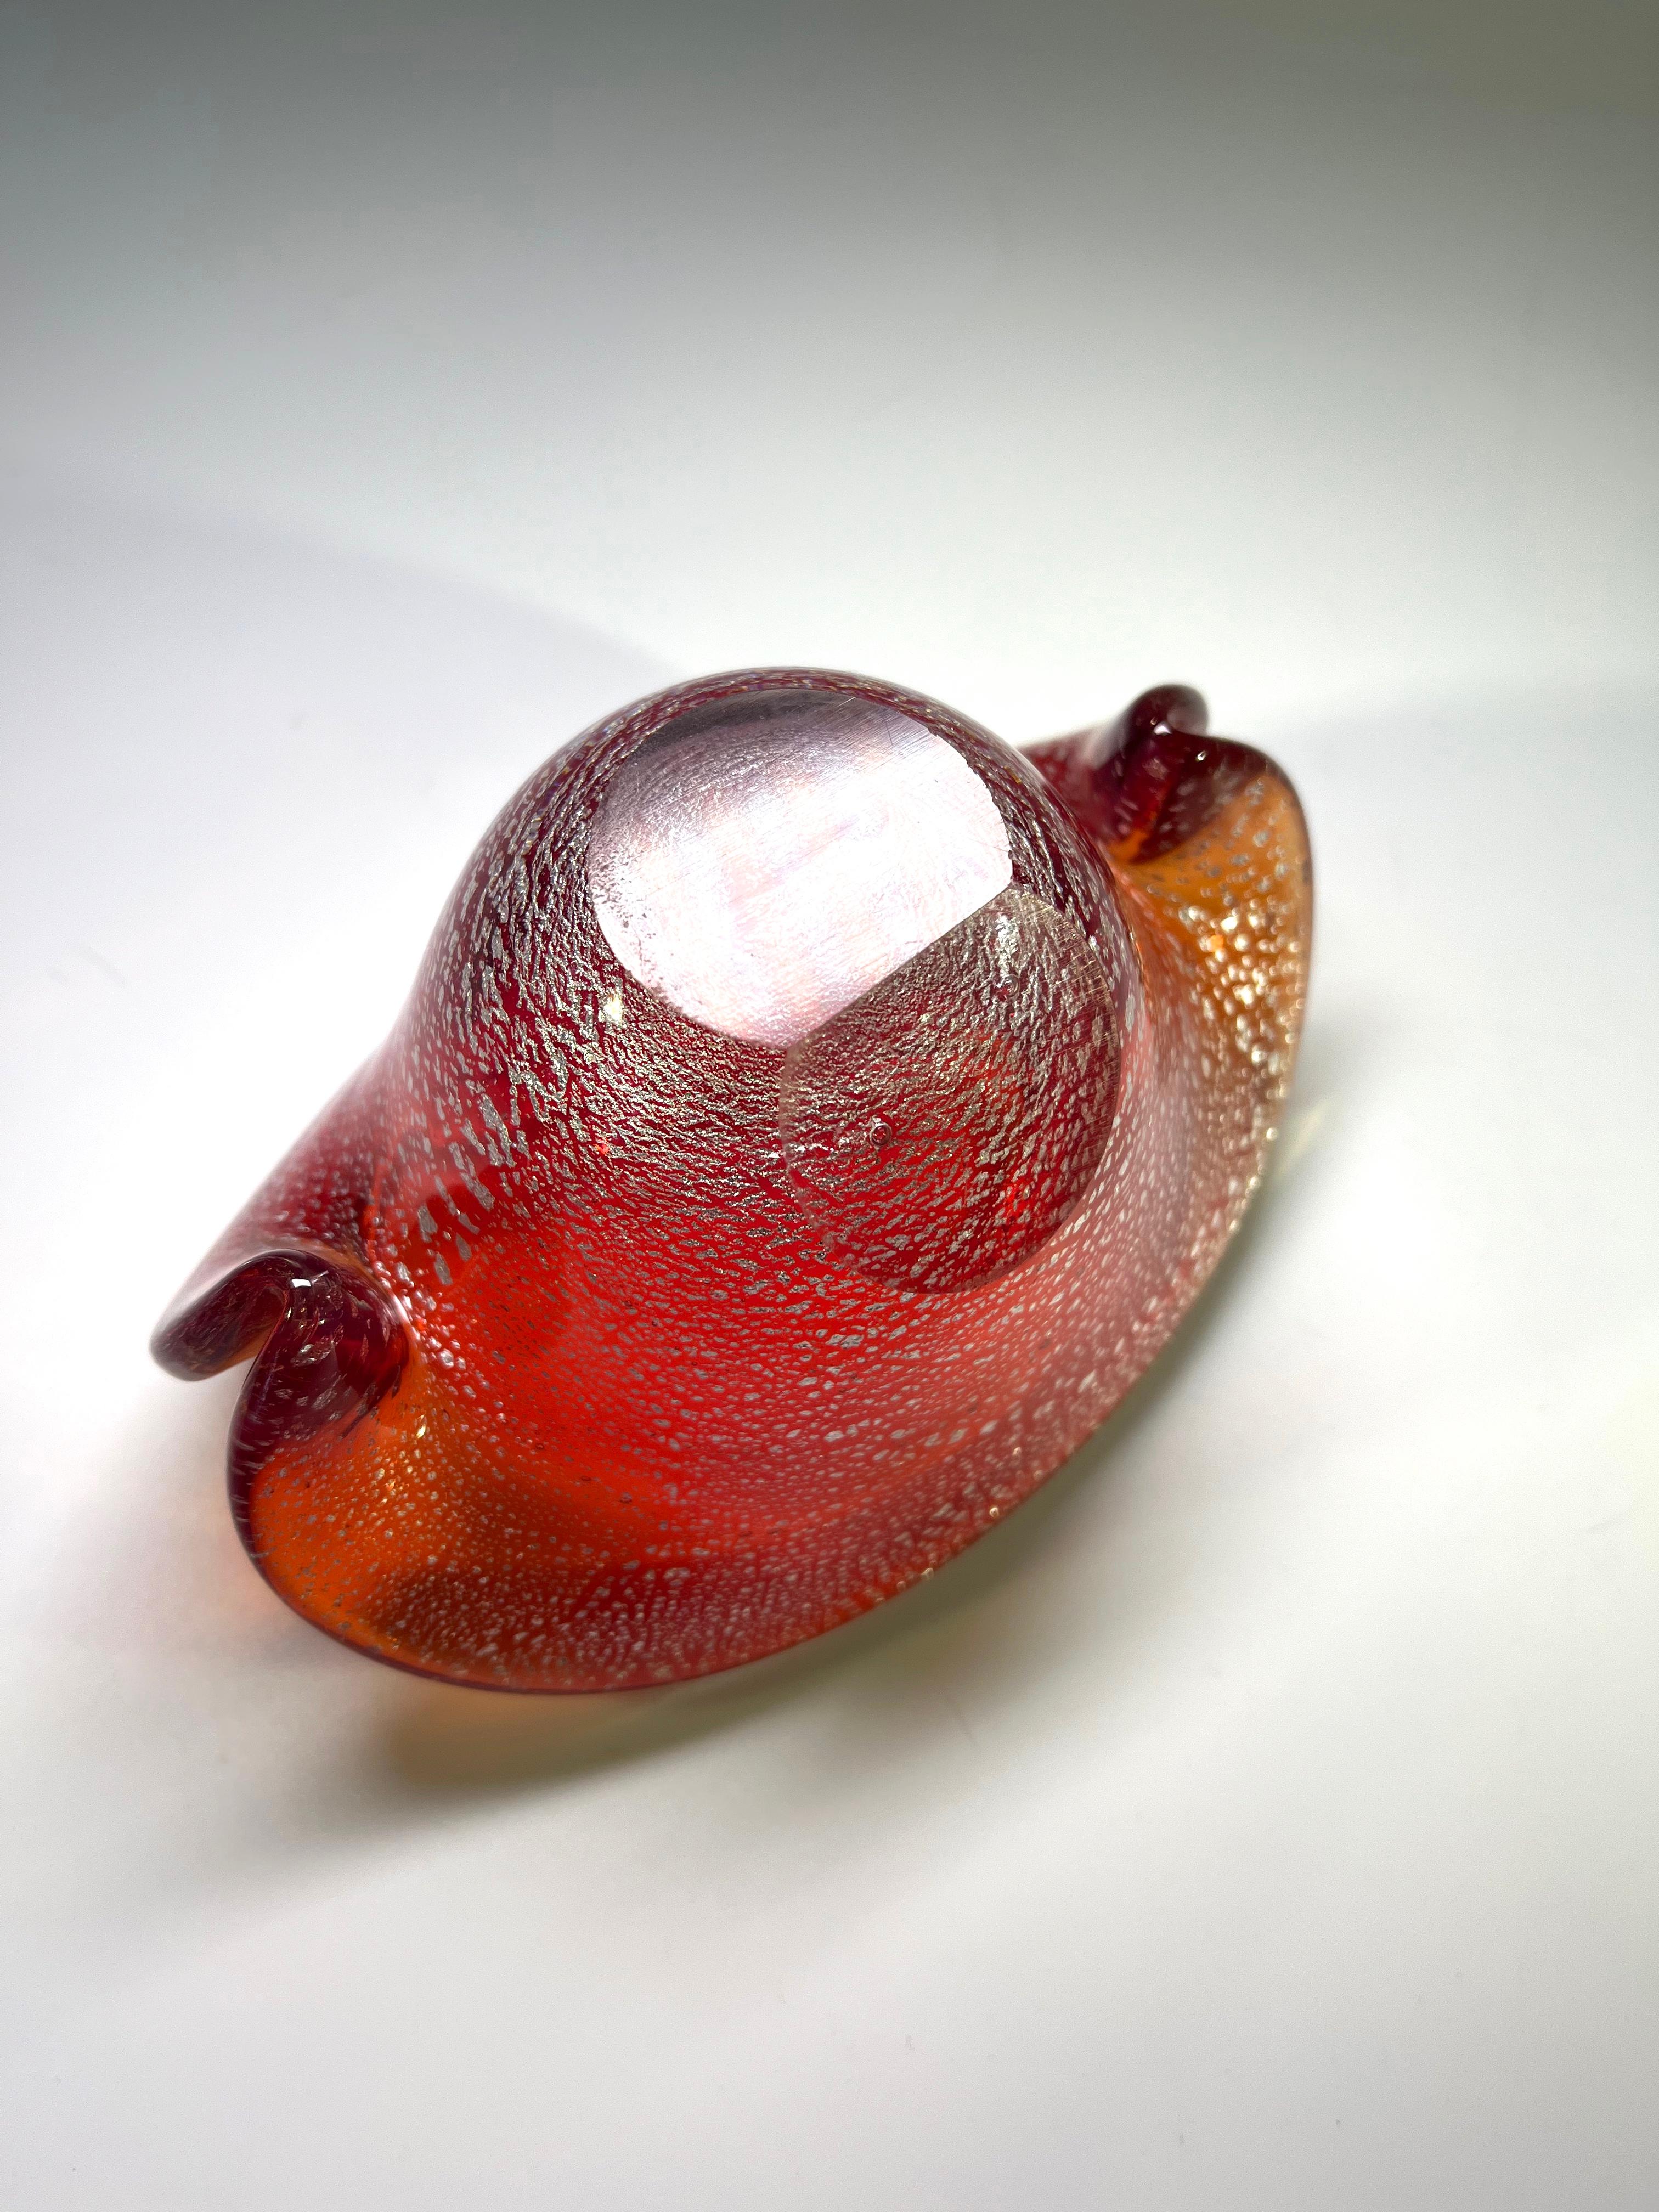 Luxuriant Liquid Amber And Silver Shards, Murano Glass Clam Shell Vase For Sale 4